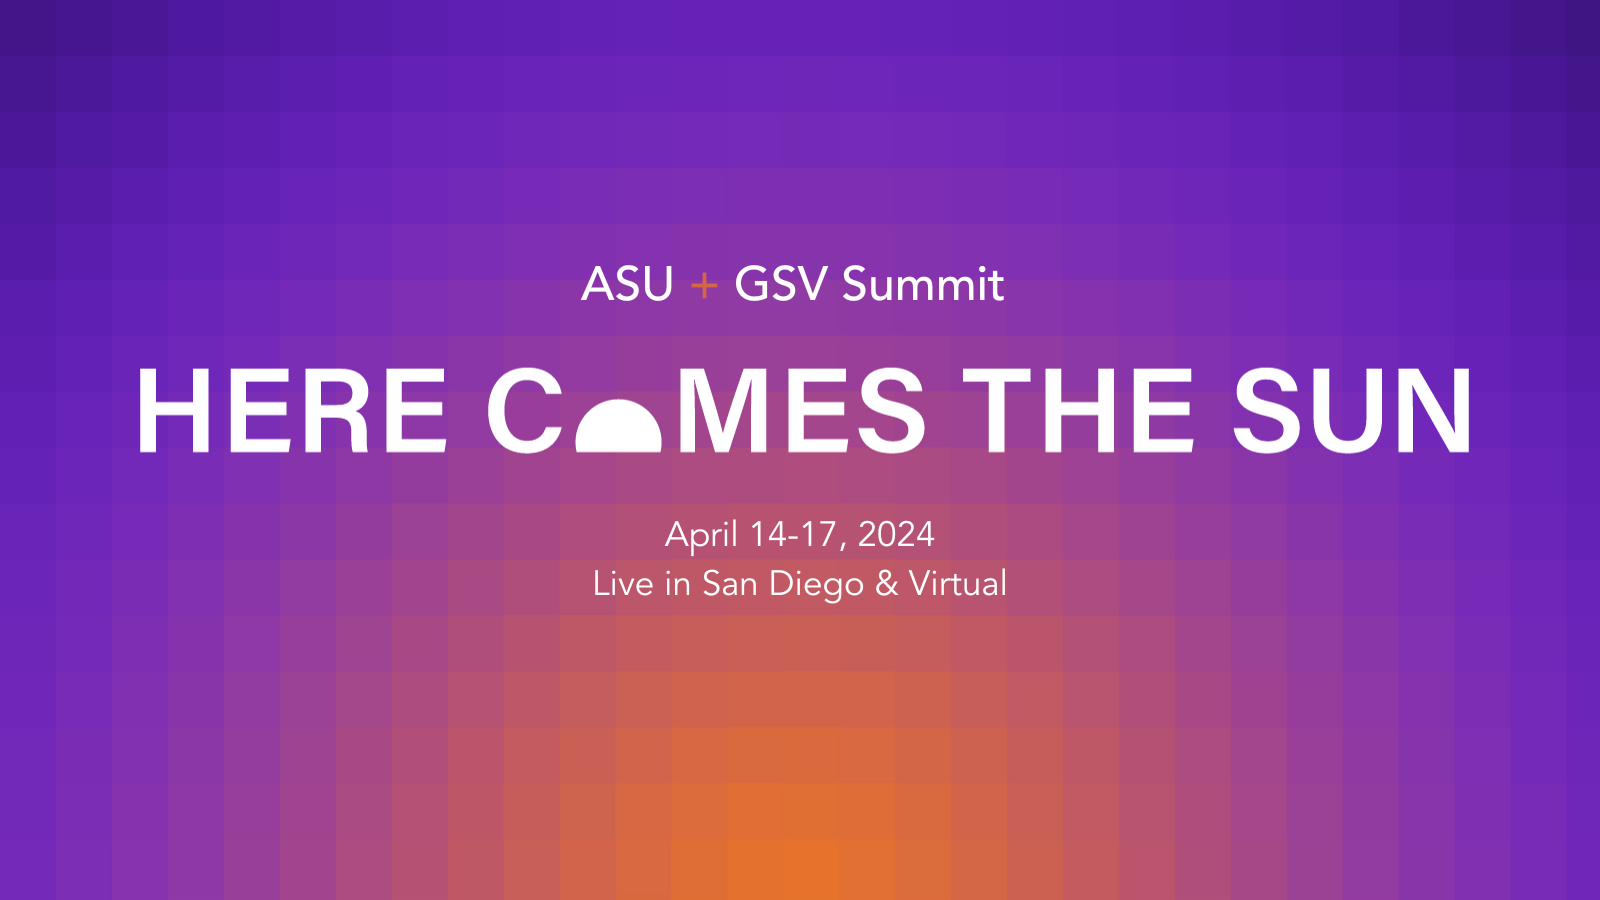 ASU+GSV 2024 Summit image, blurred orange circle on purple background, title reads "Here comes the sun"